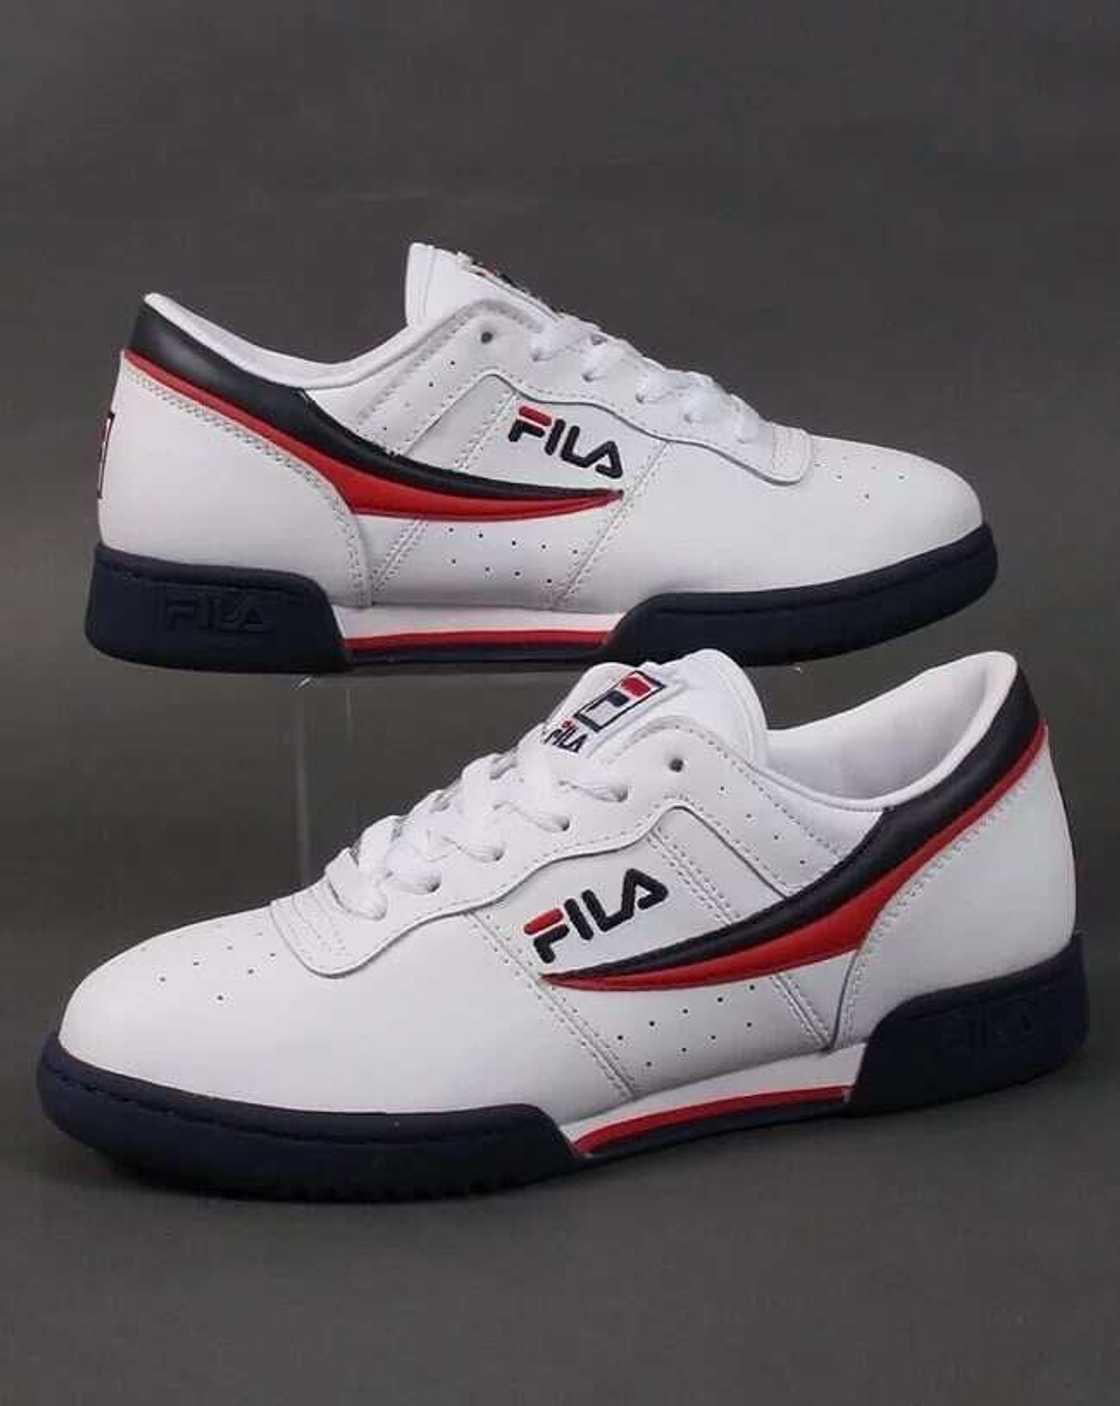 The popular shoes all 90s kids wore to school